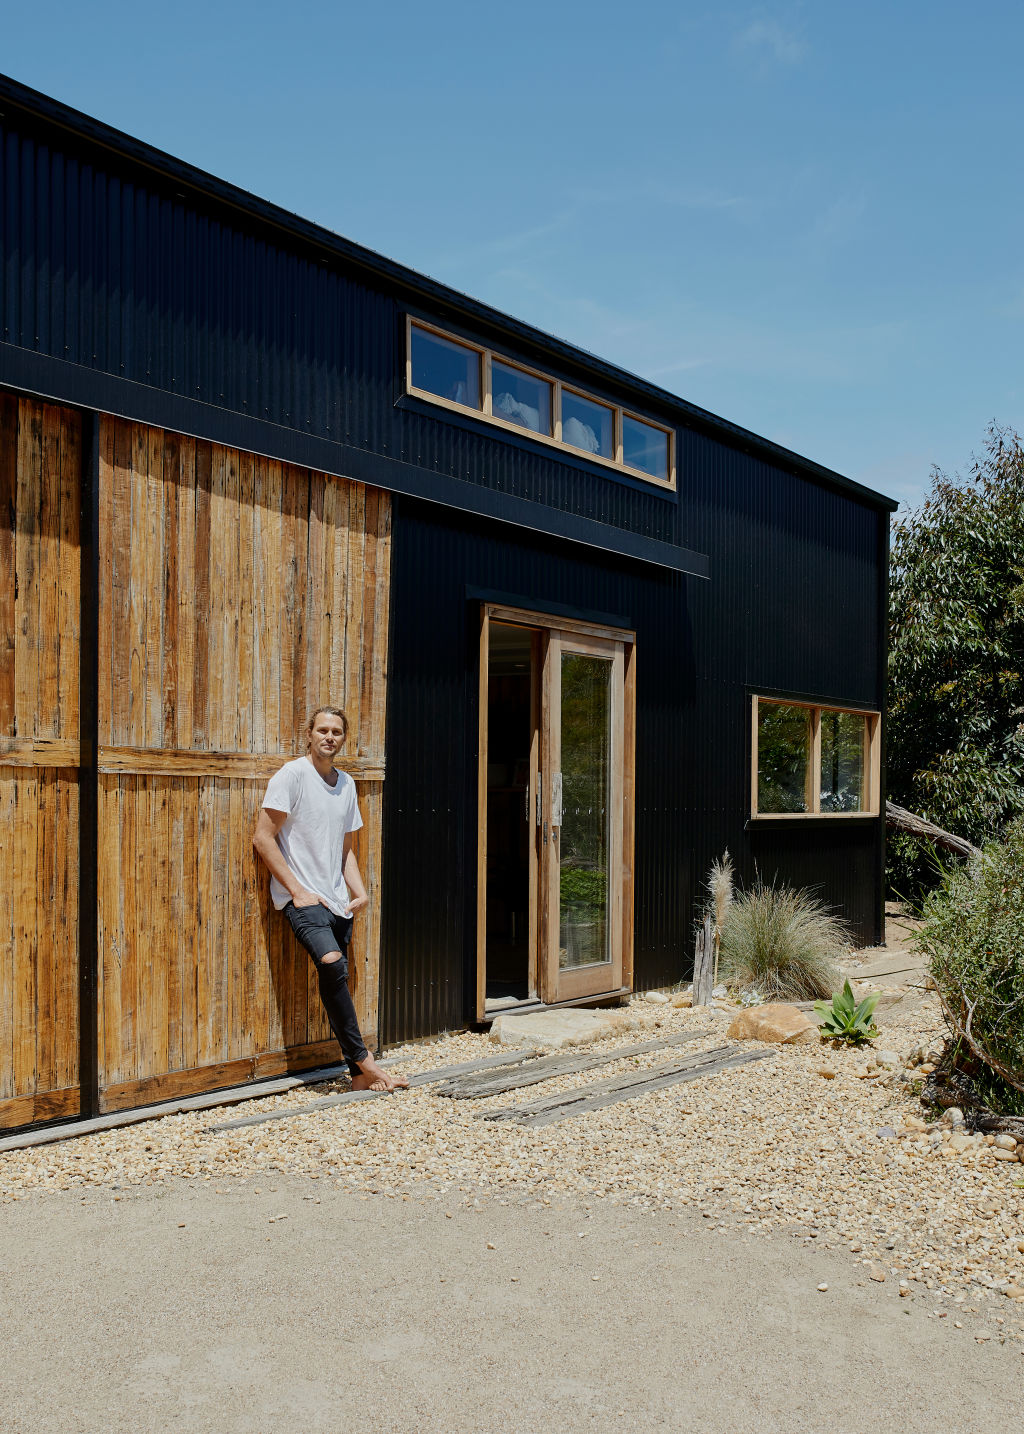 The black Colorbond steel shed comes from West Gippsland Sheds.  Photo: Amelia Stanwix